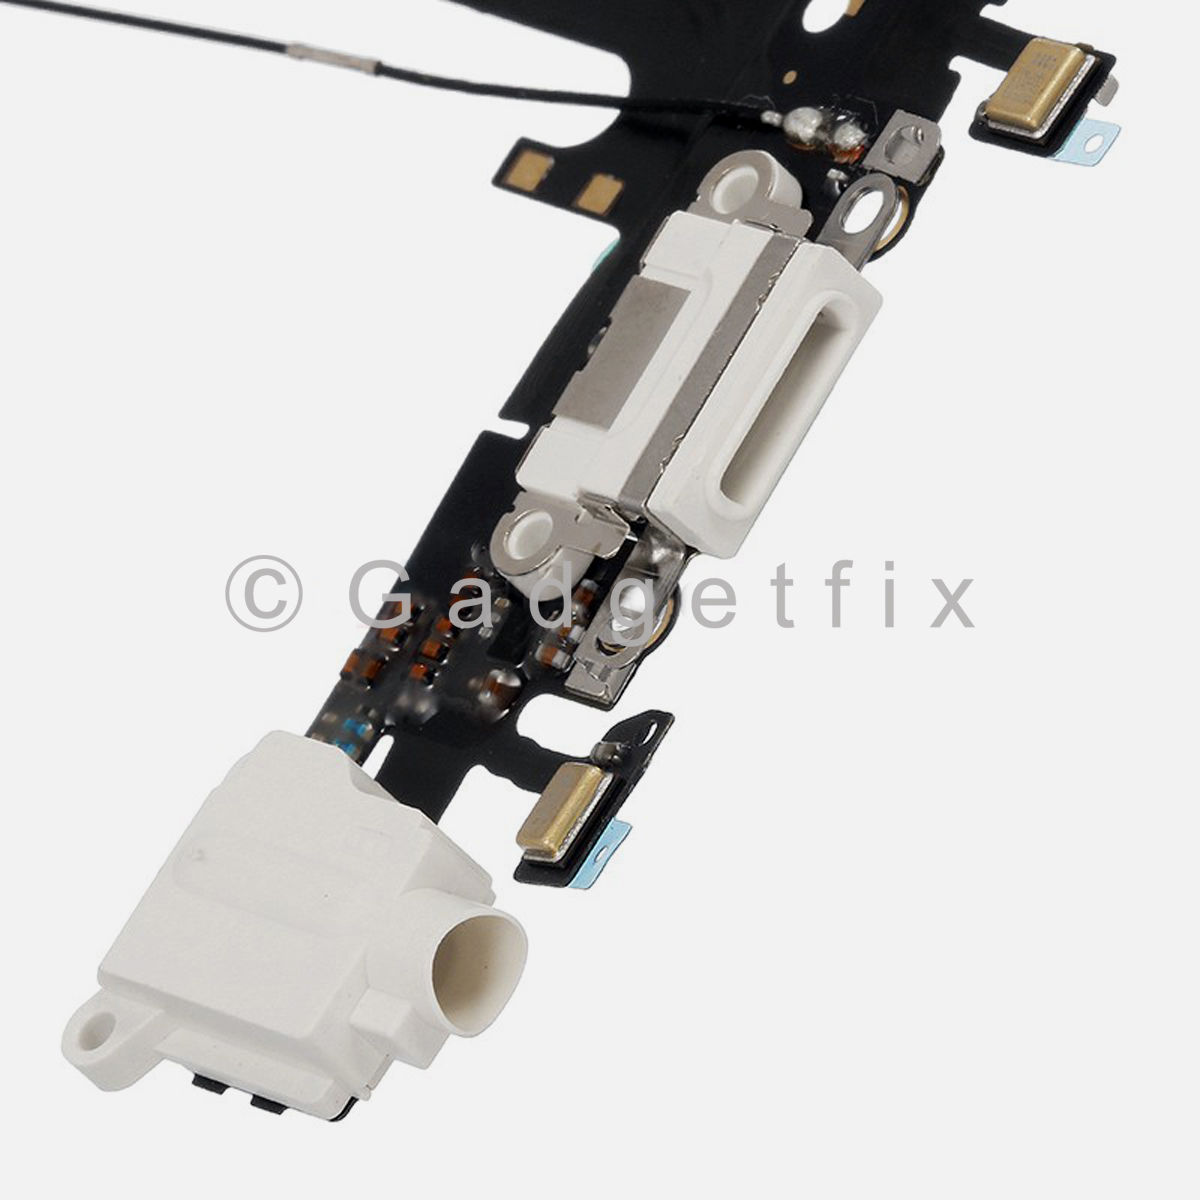 New Charging Charger Port Dock Headphone Jack Mic White Flex Cable for Iphone 6S